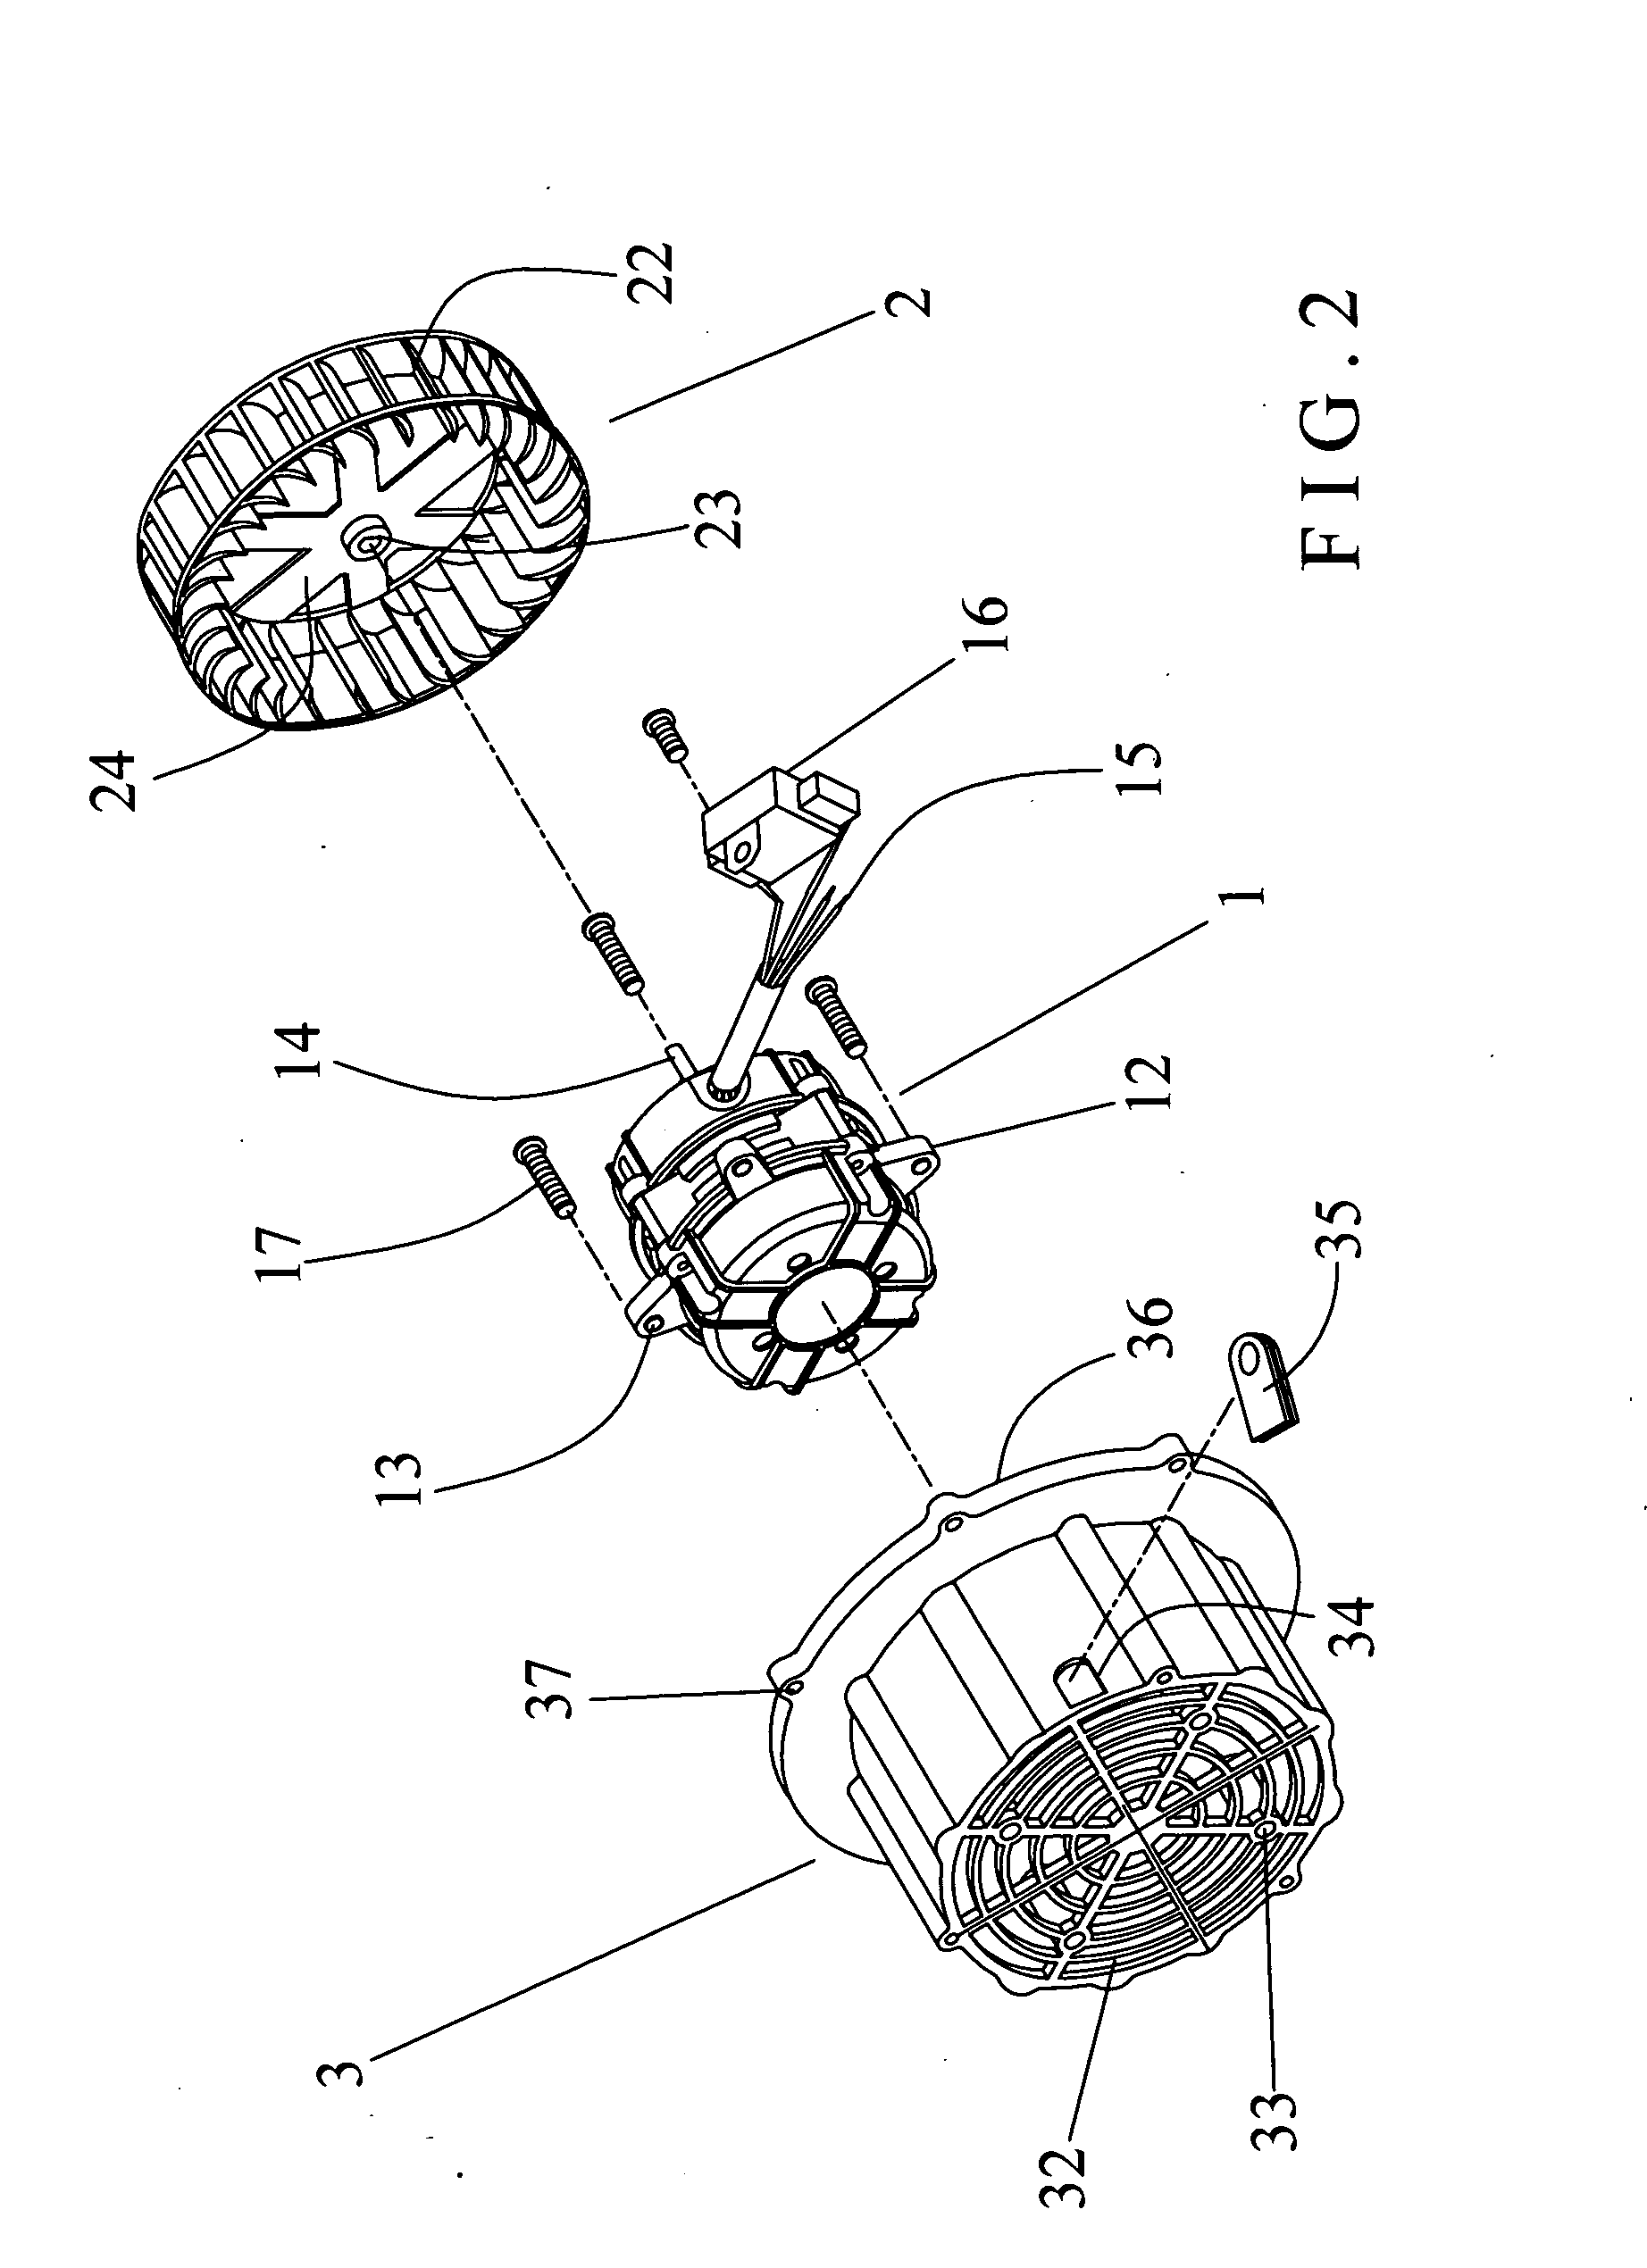 Motor-operated fan for air cushion table